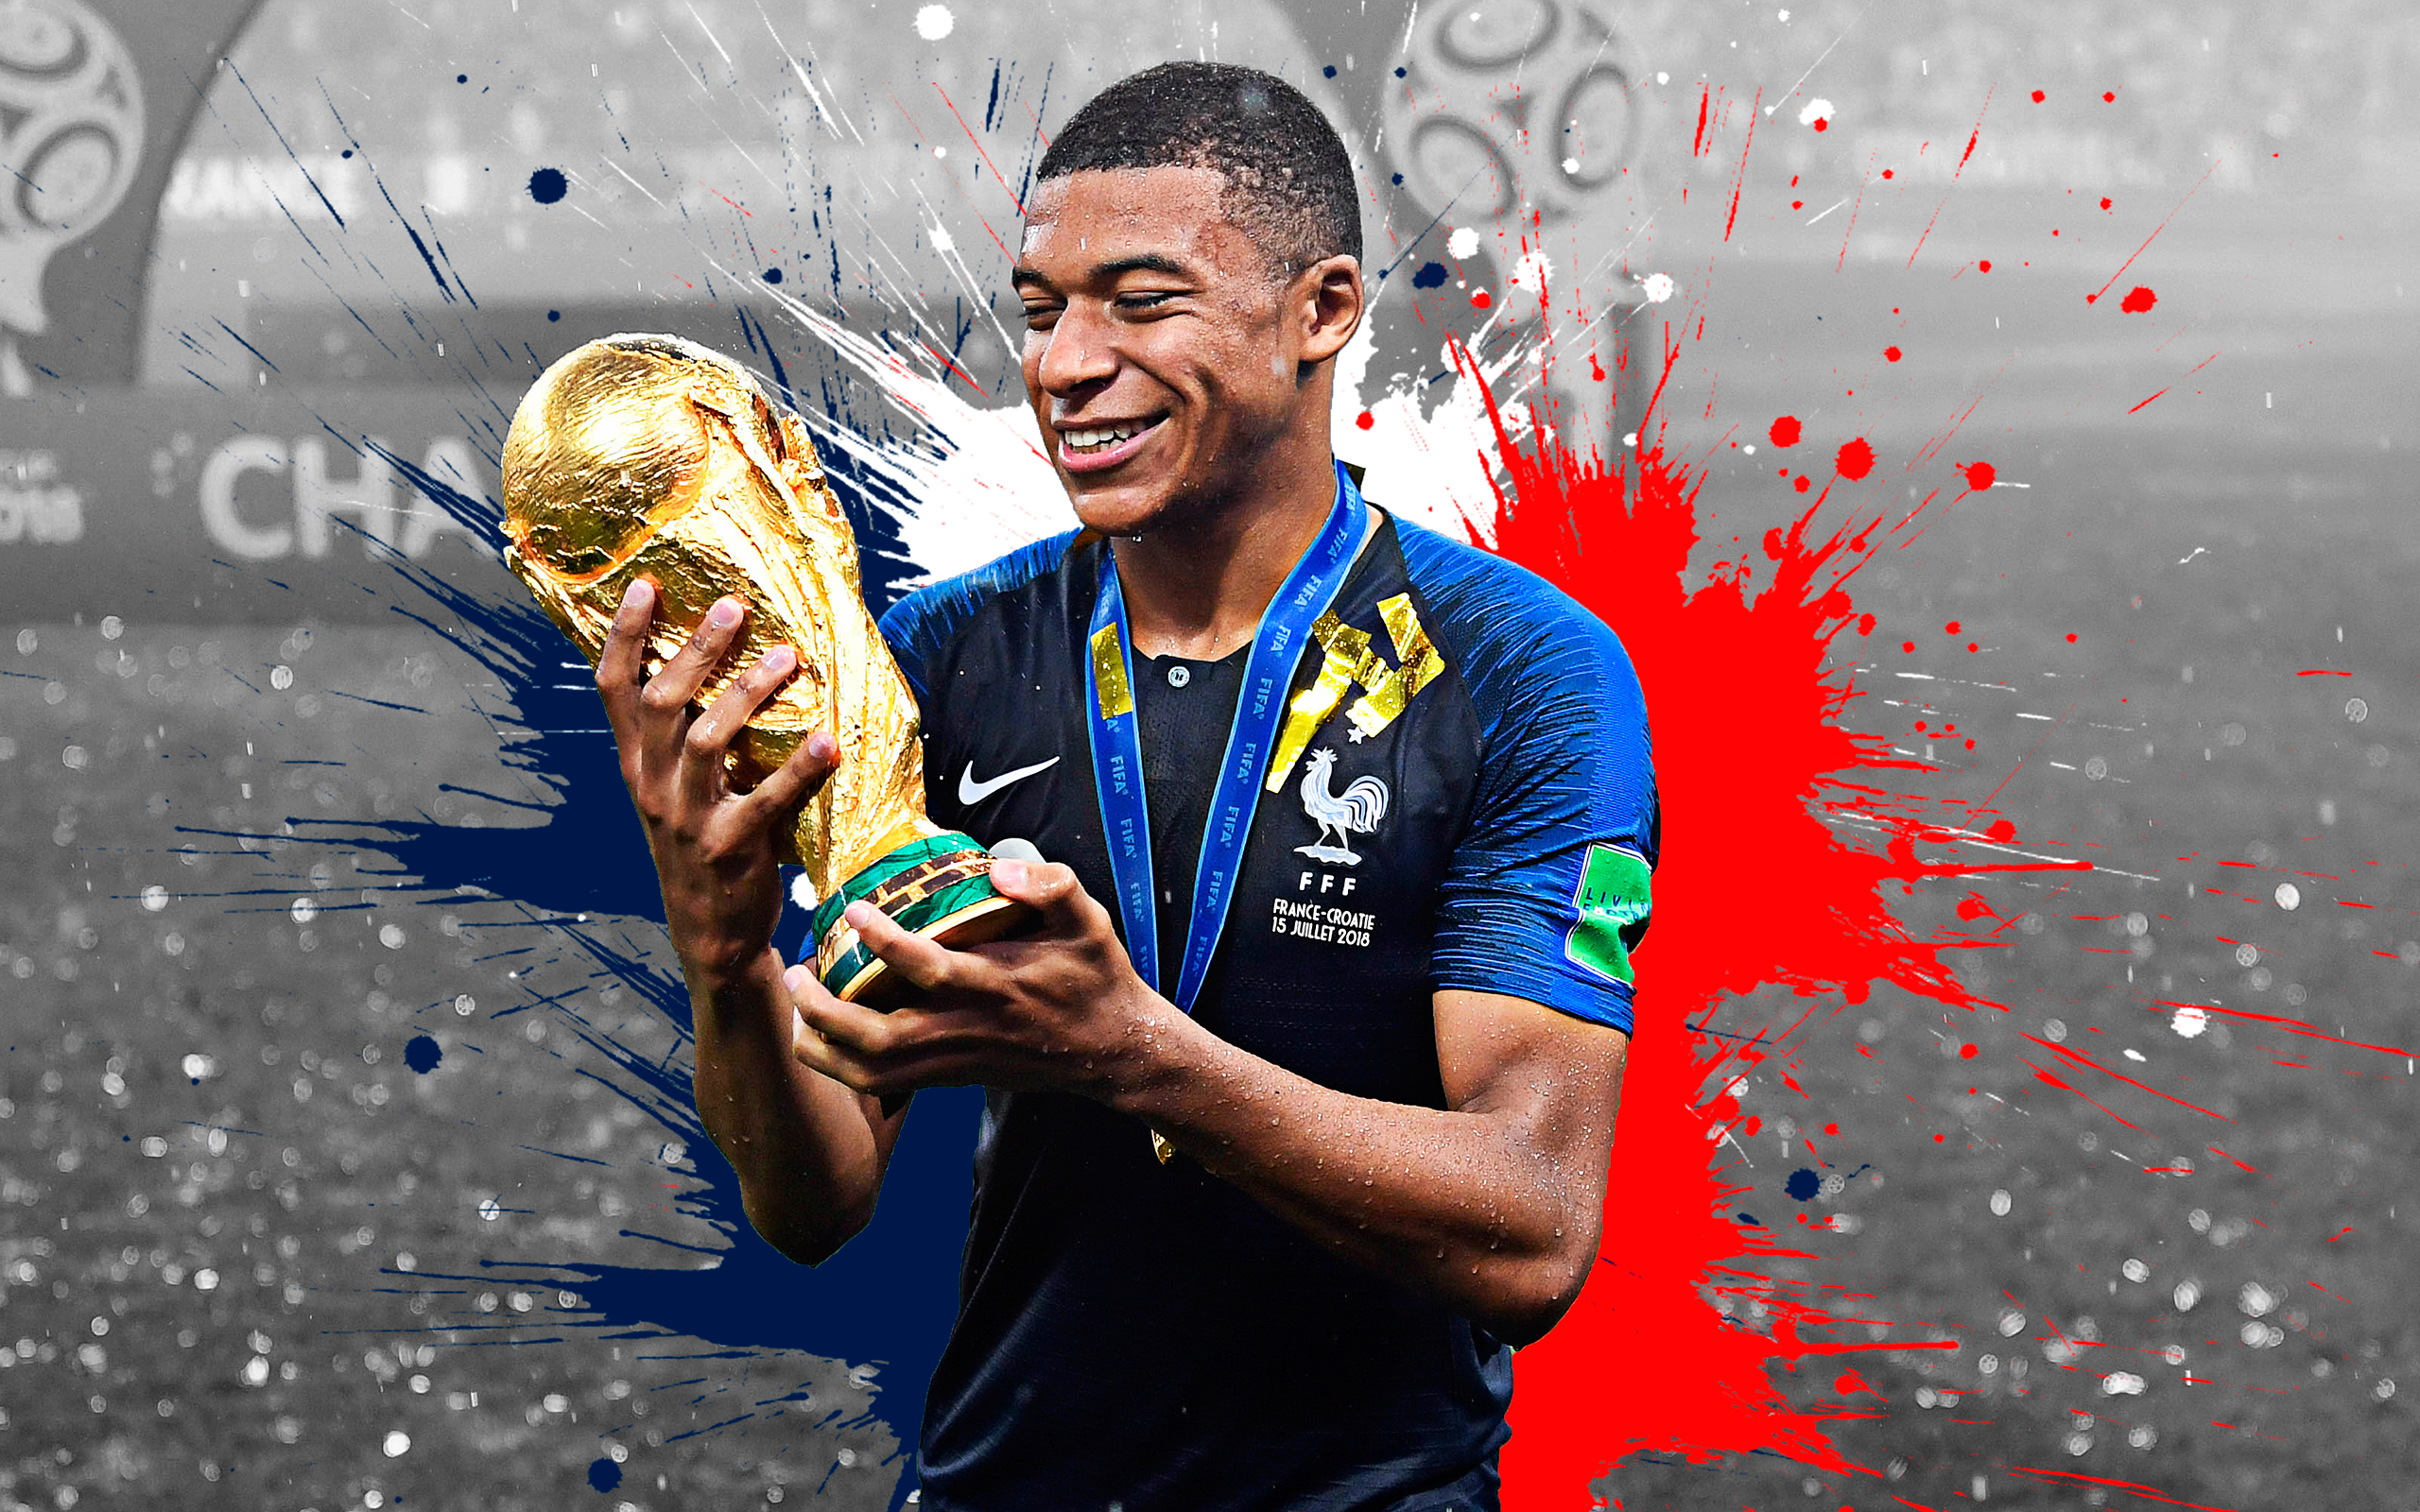 French Kylian Mbappe Soccer World Cup 2018 2560x1600